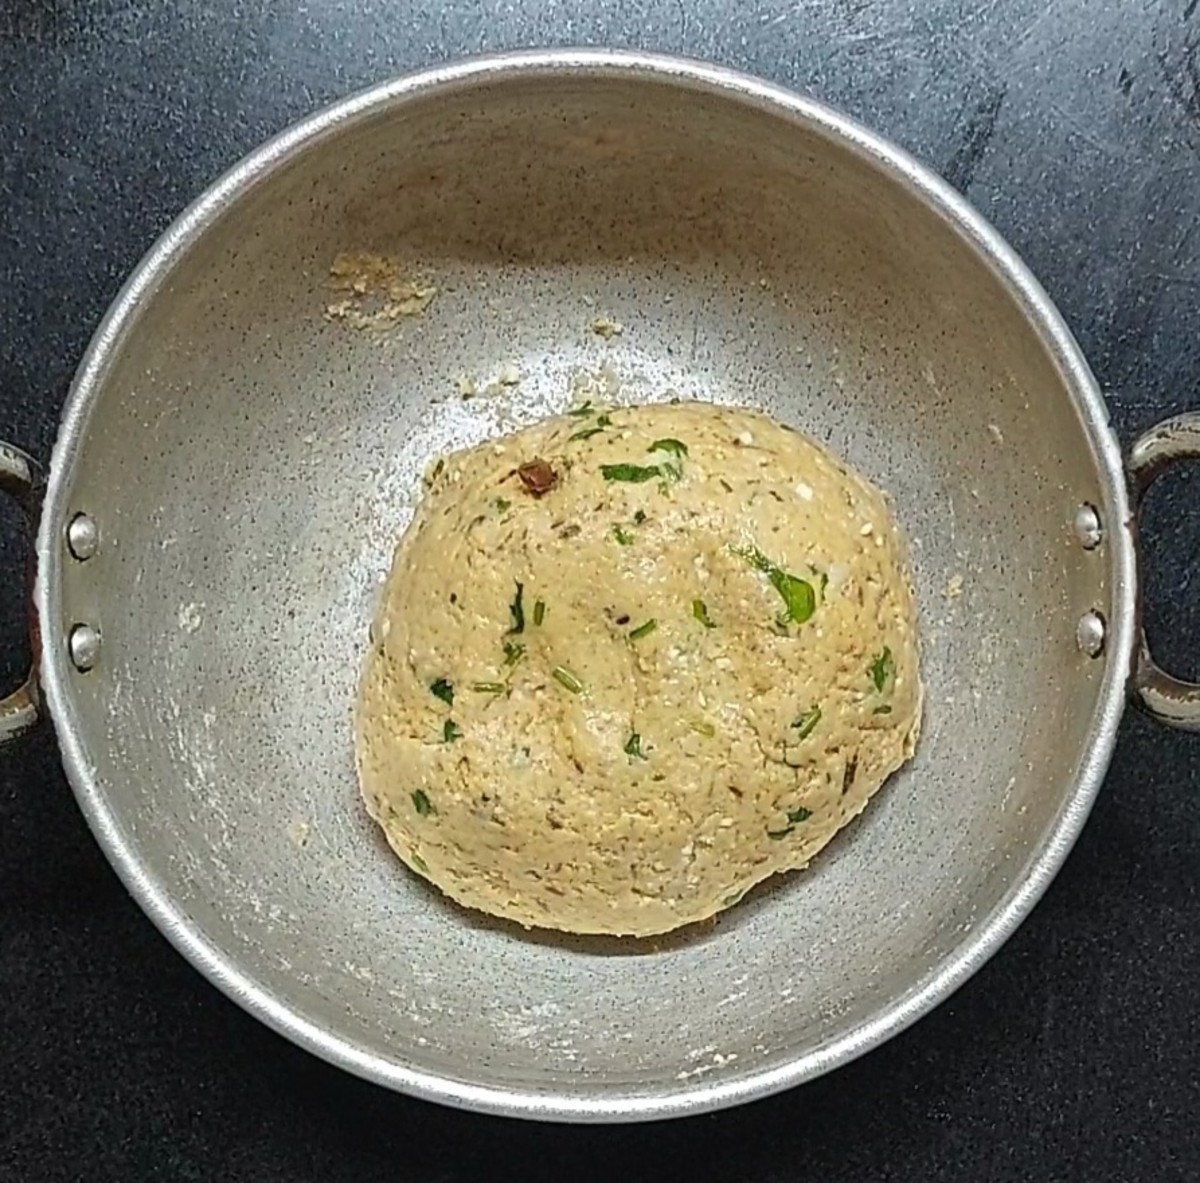 Gradually add water to avoid making a sticky dough.  Grease the dough with 1 teaspoon oil, cover and let sit for 10 minutes.